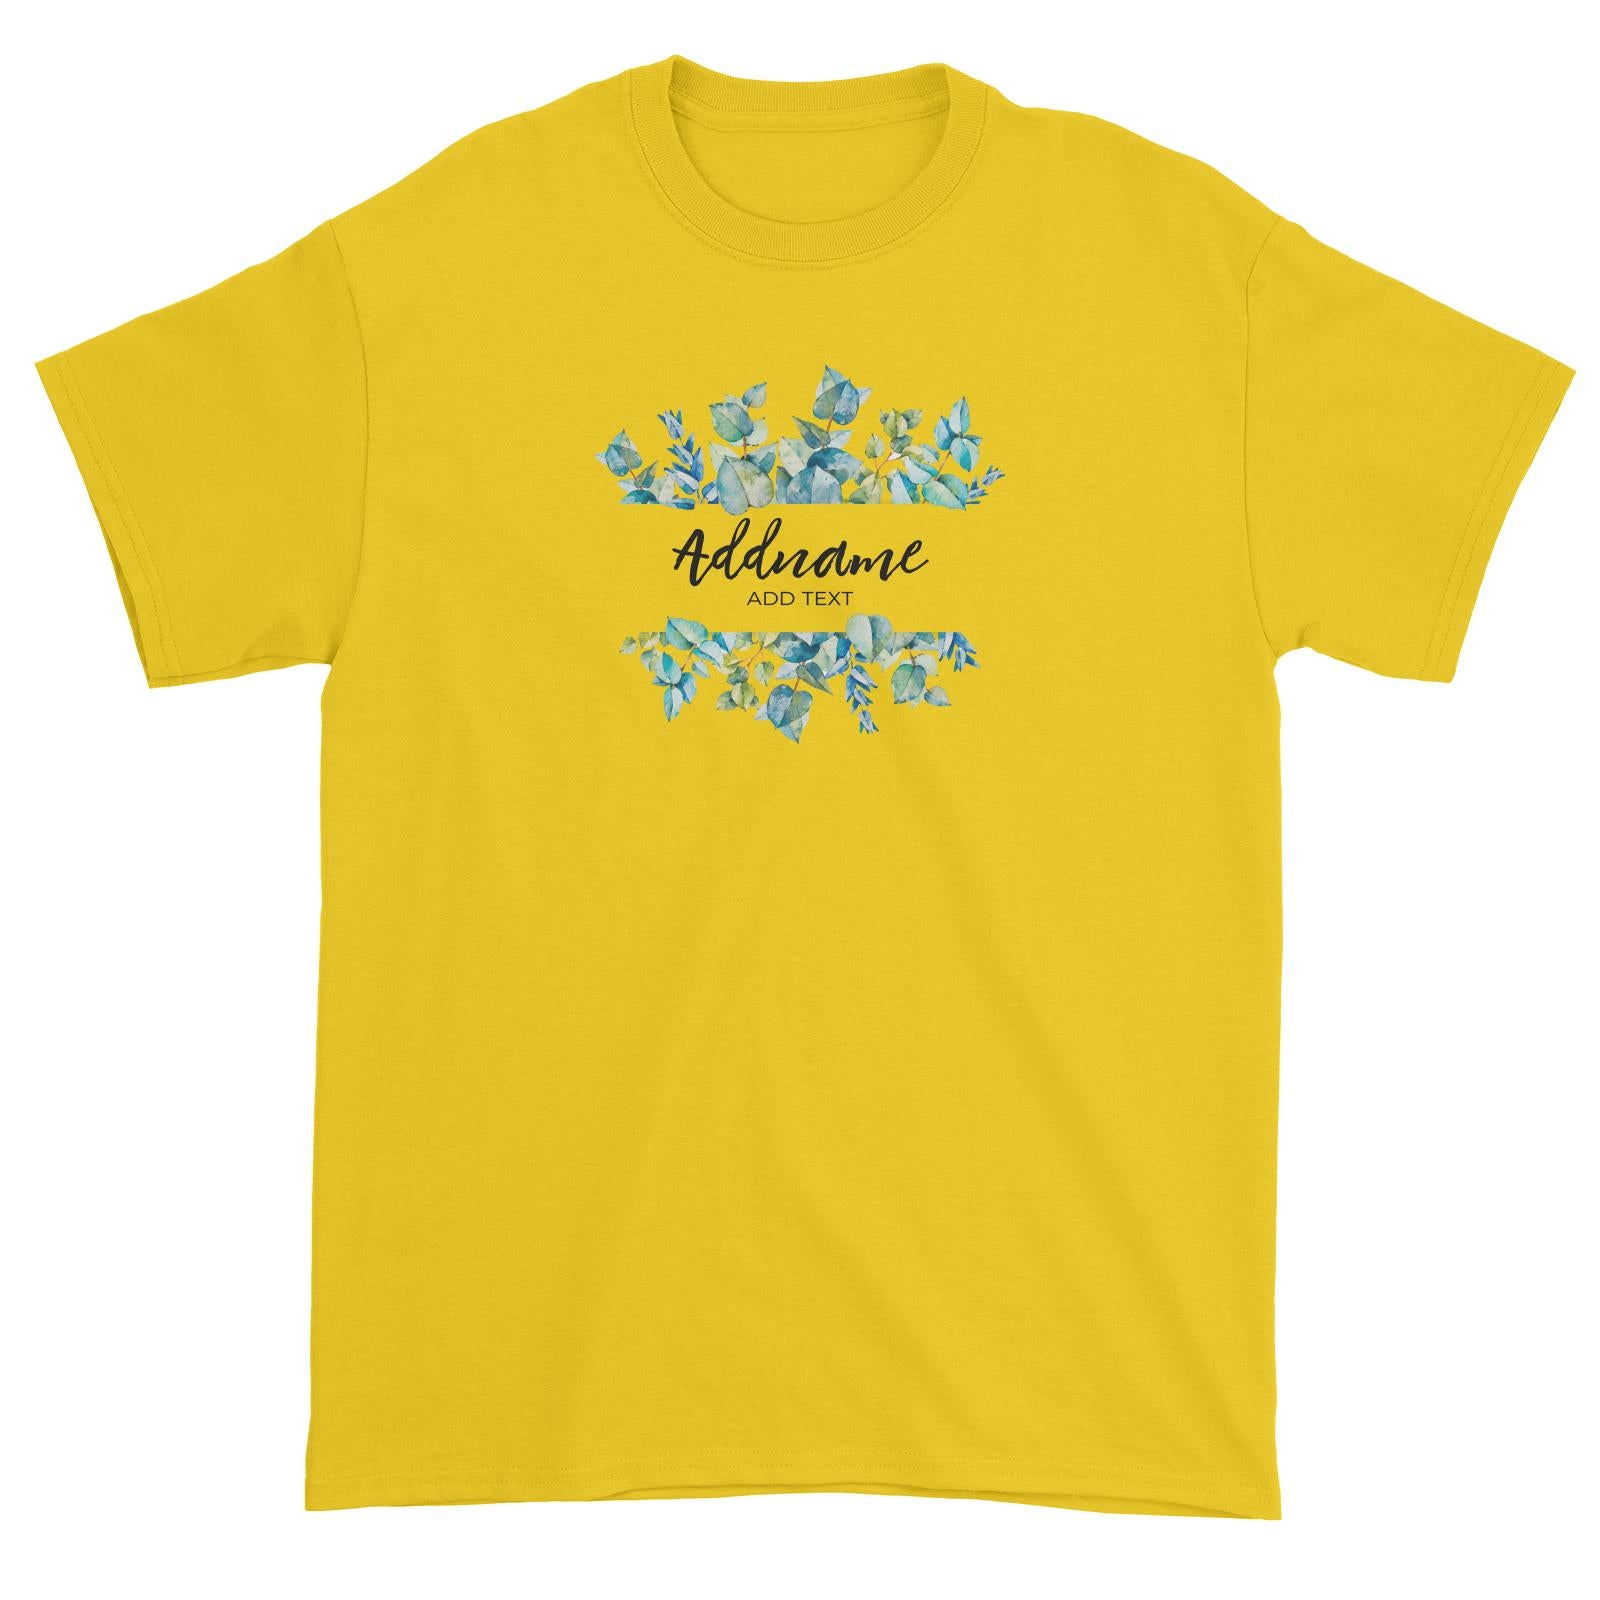 Add Your Own Text Teacher Blue Leaves Box Addname And Add Text Unisex T-Shirt